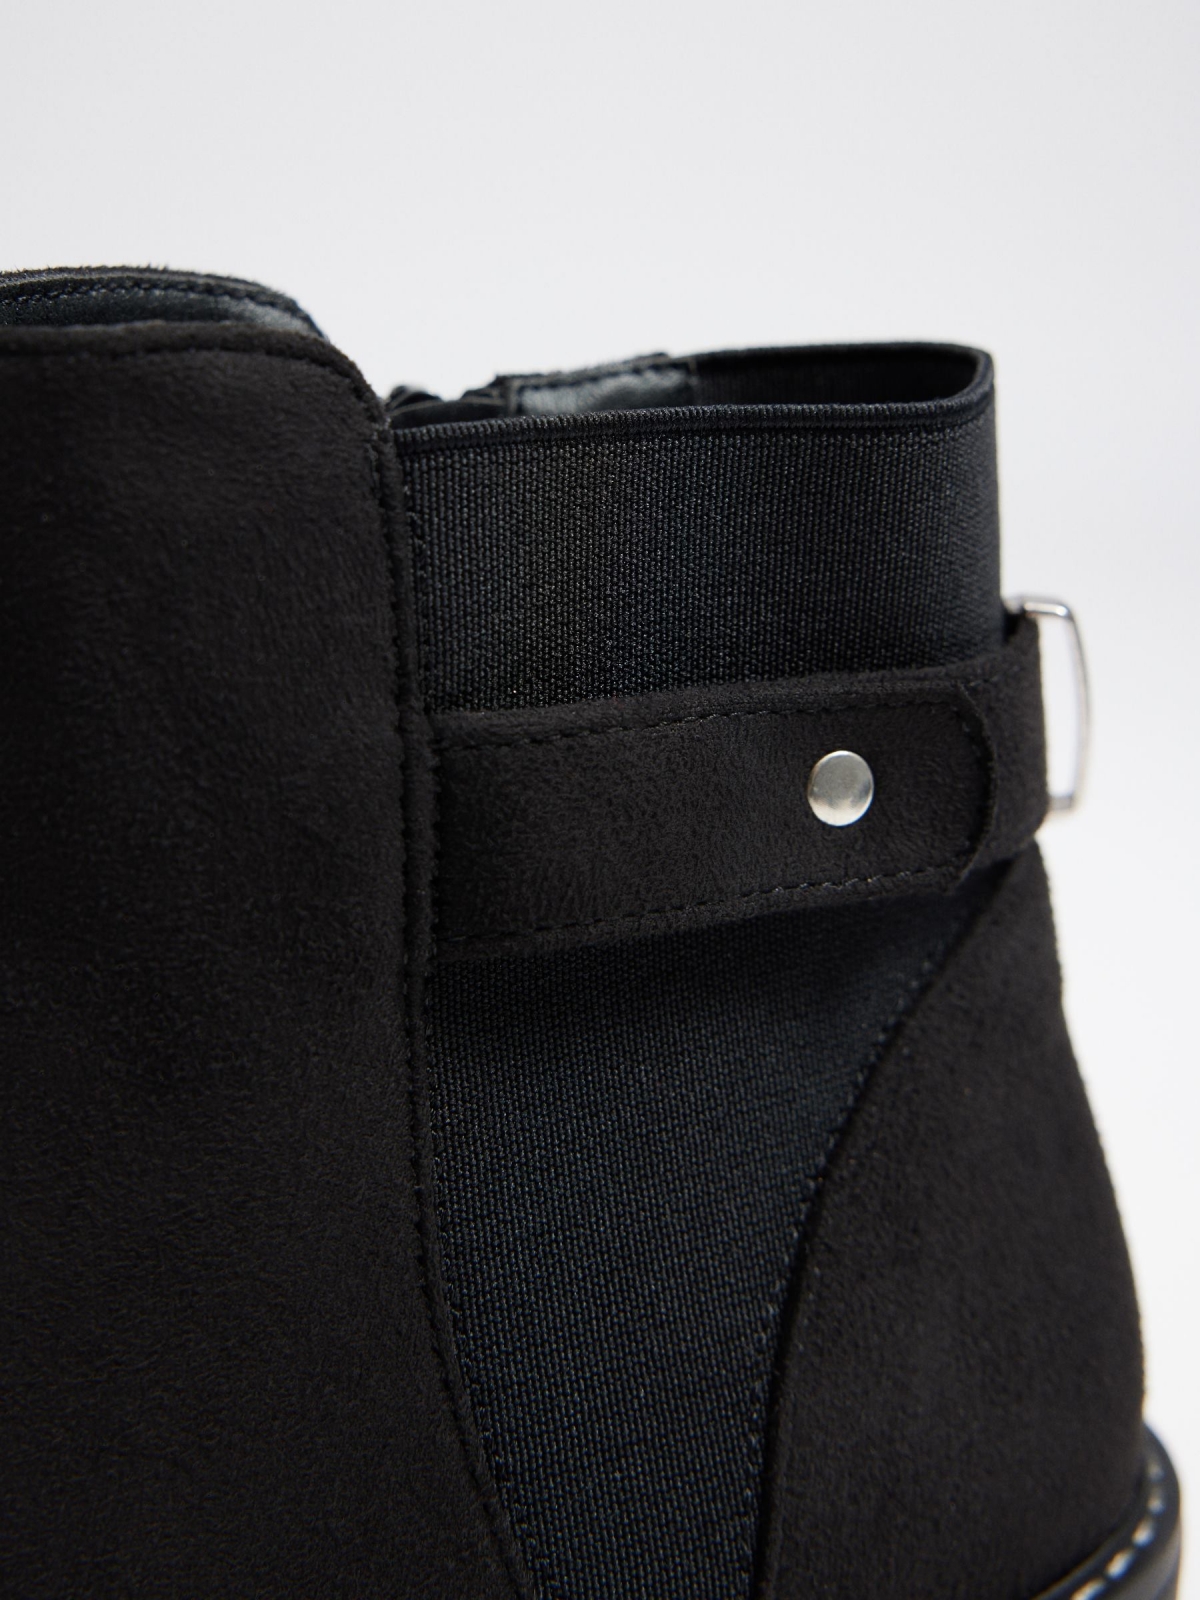 Wedge and buckle boots detail view